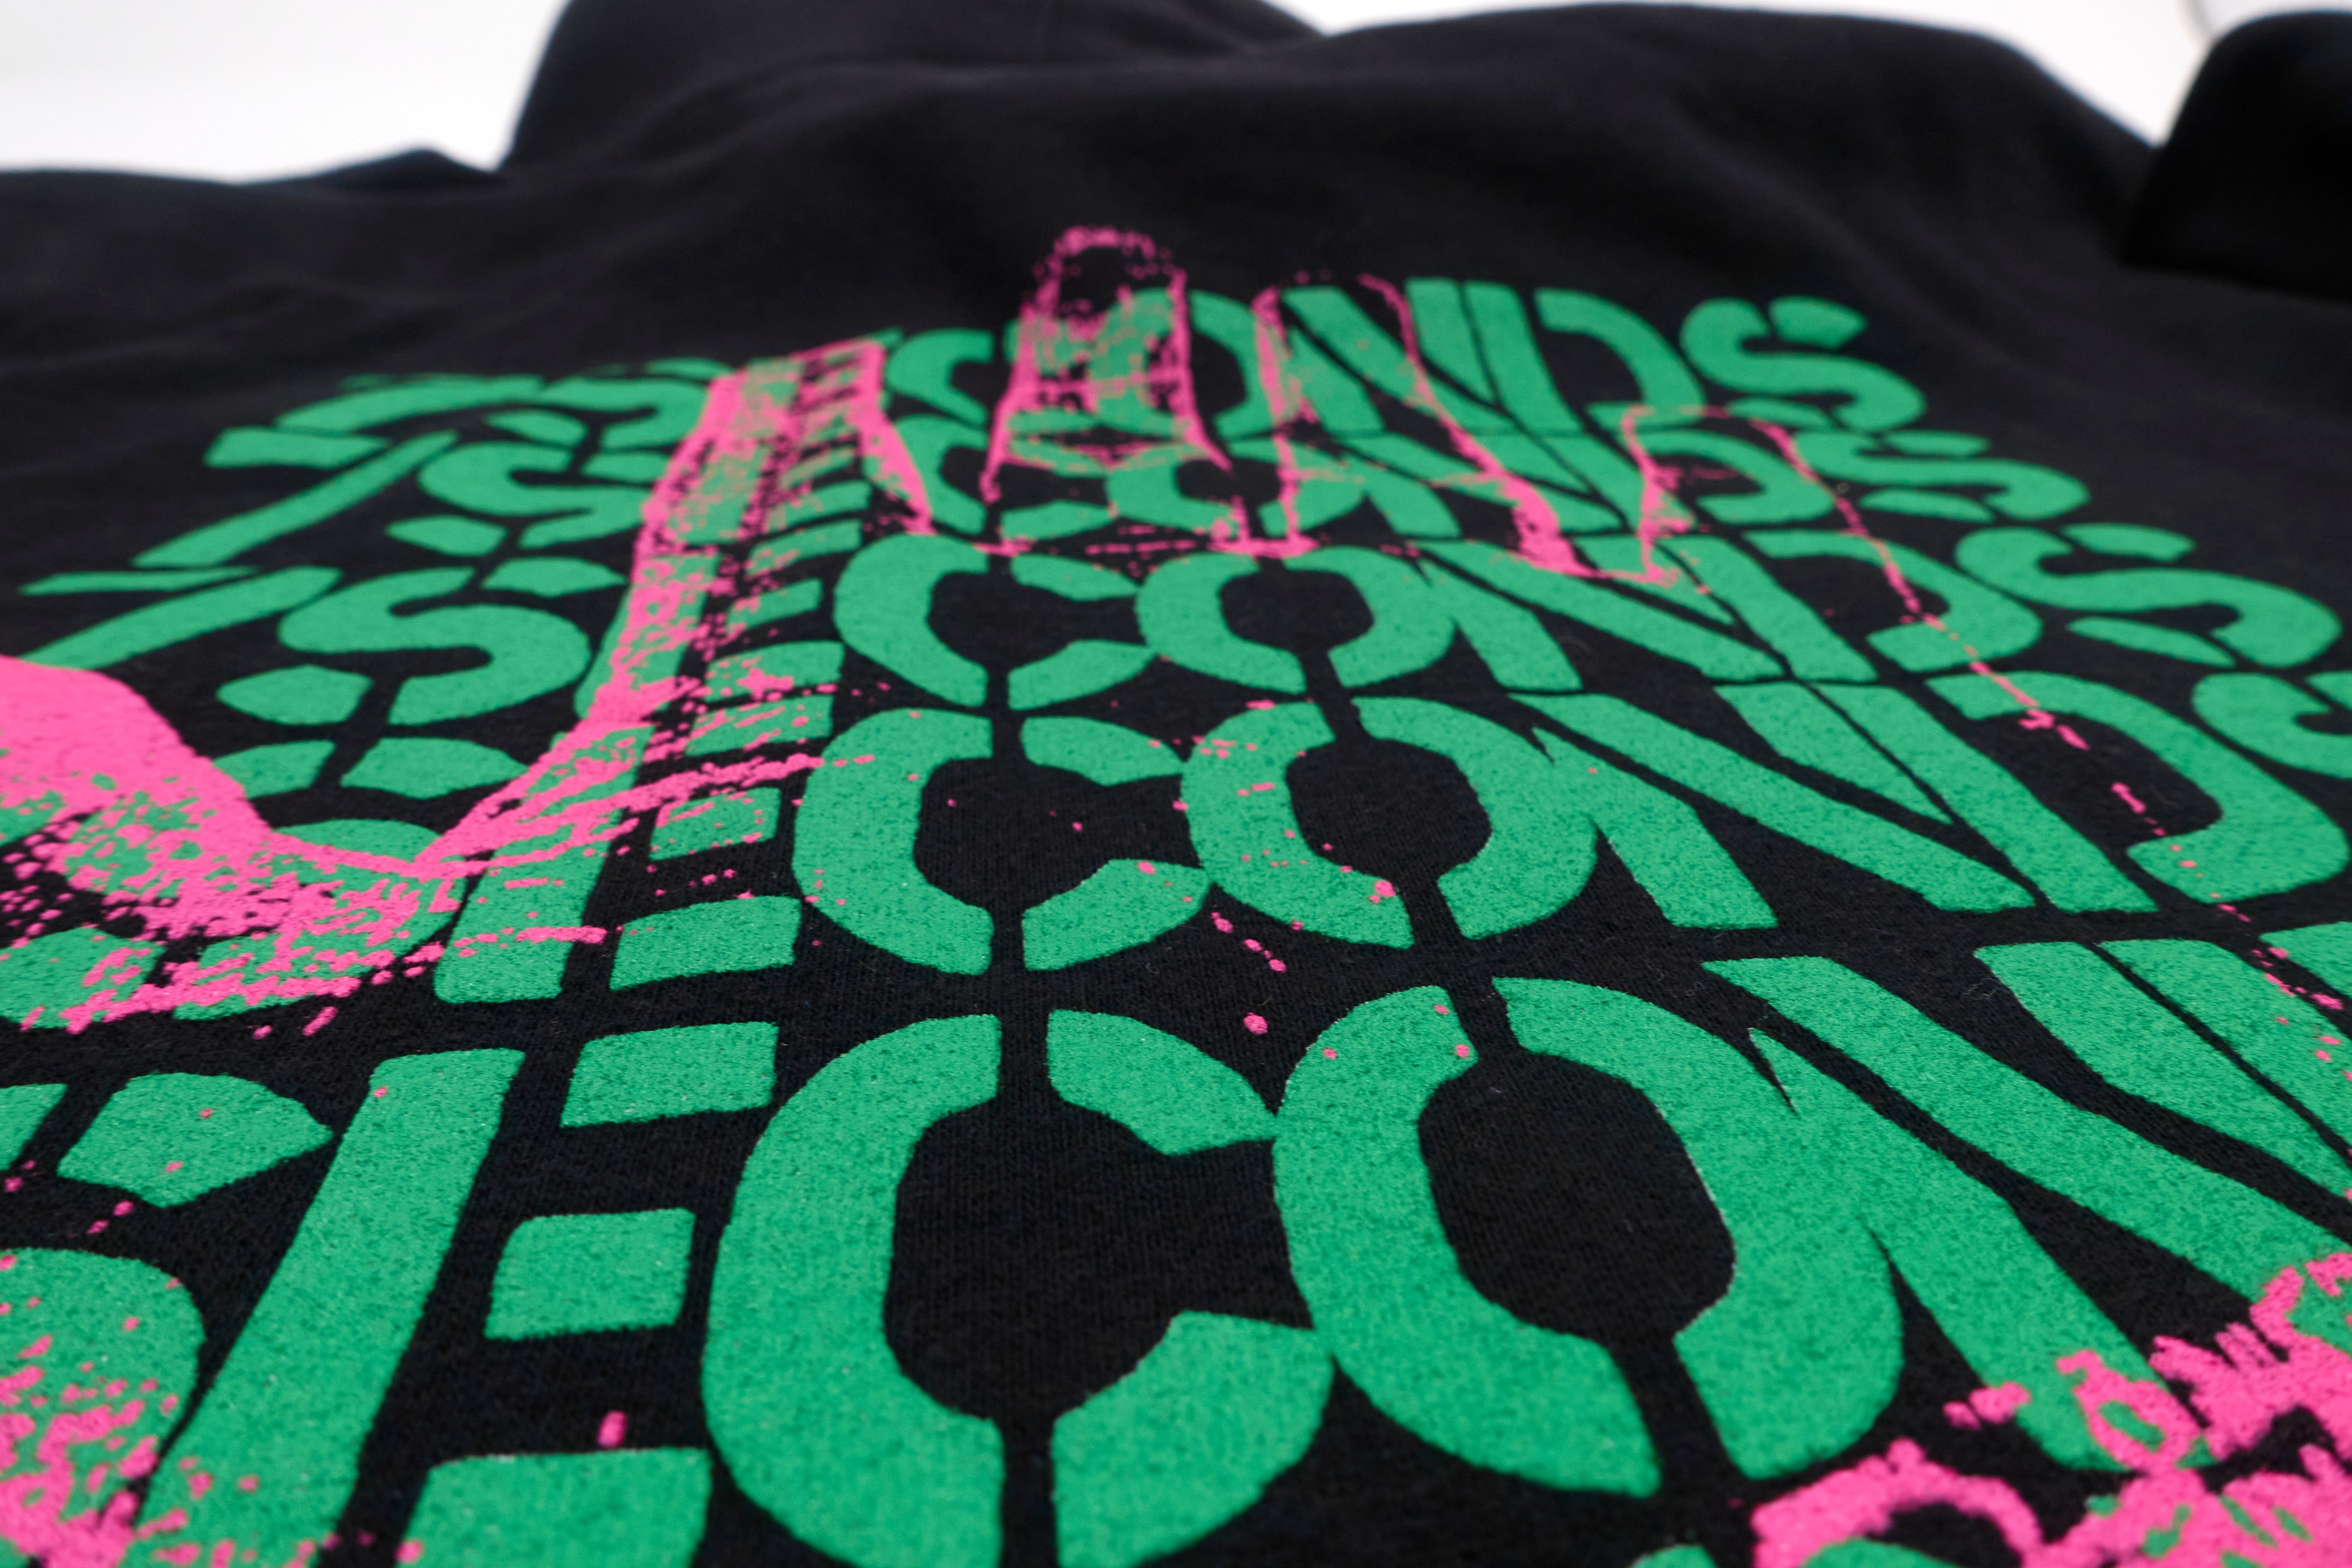 7 Seconds – Soulforce Revolution Hooded Sweat Shirt (Bootleg By Me) Size Large